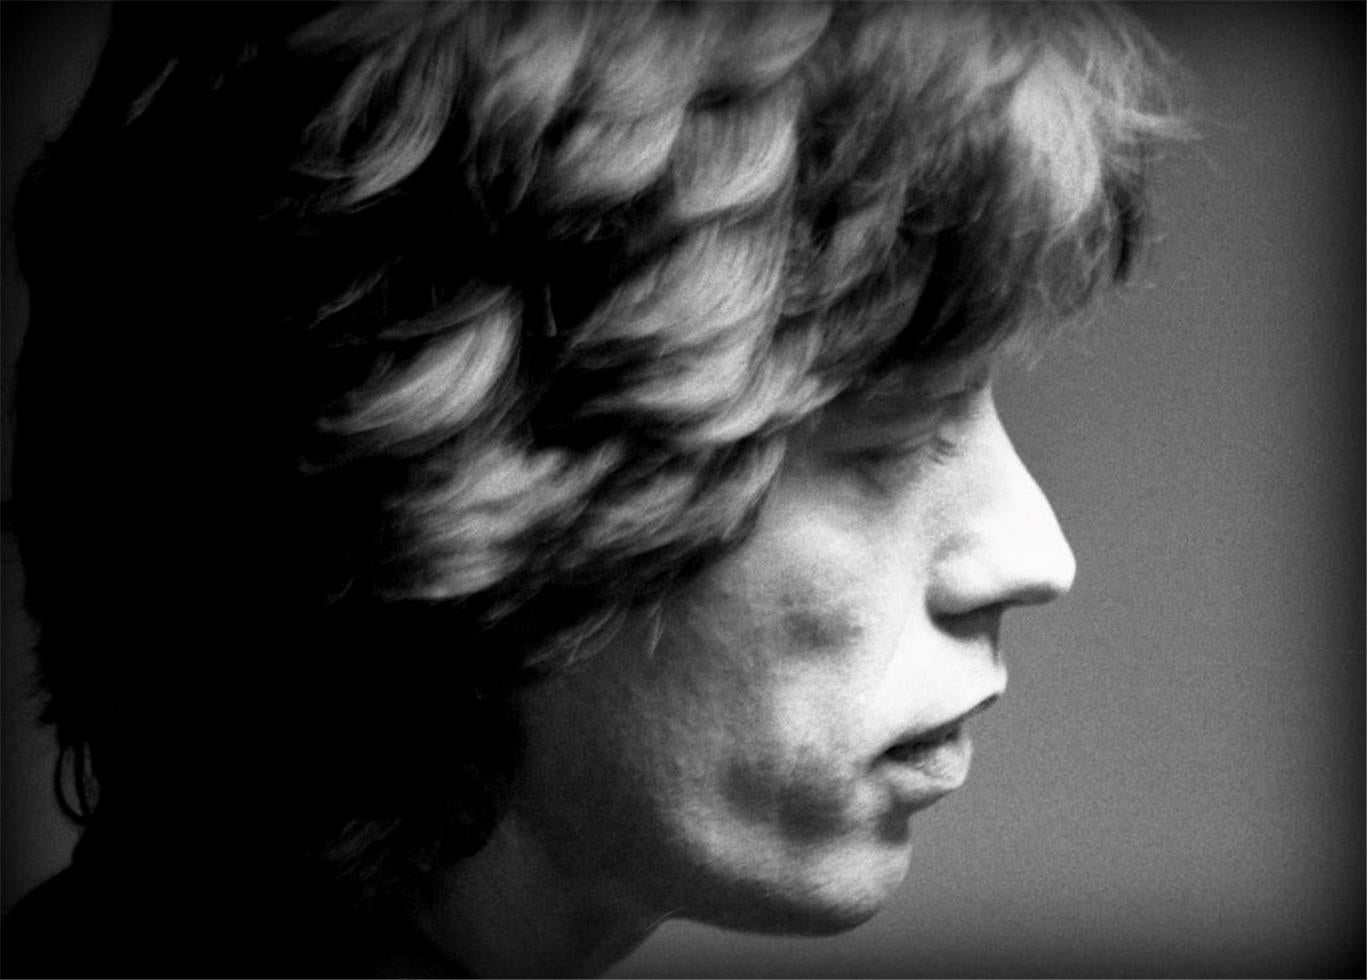 Peter Simon Black and White Photograph - Mick Jagger, The Rolling Stones, 1978